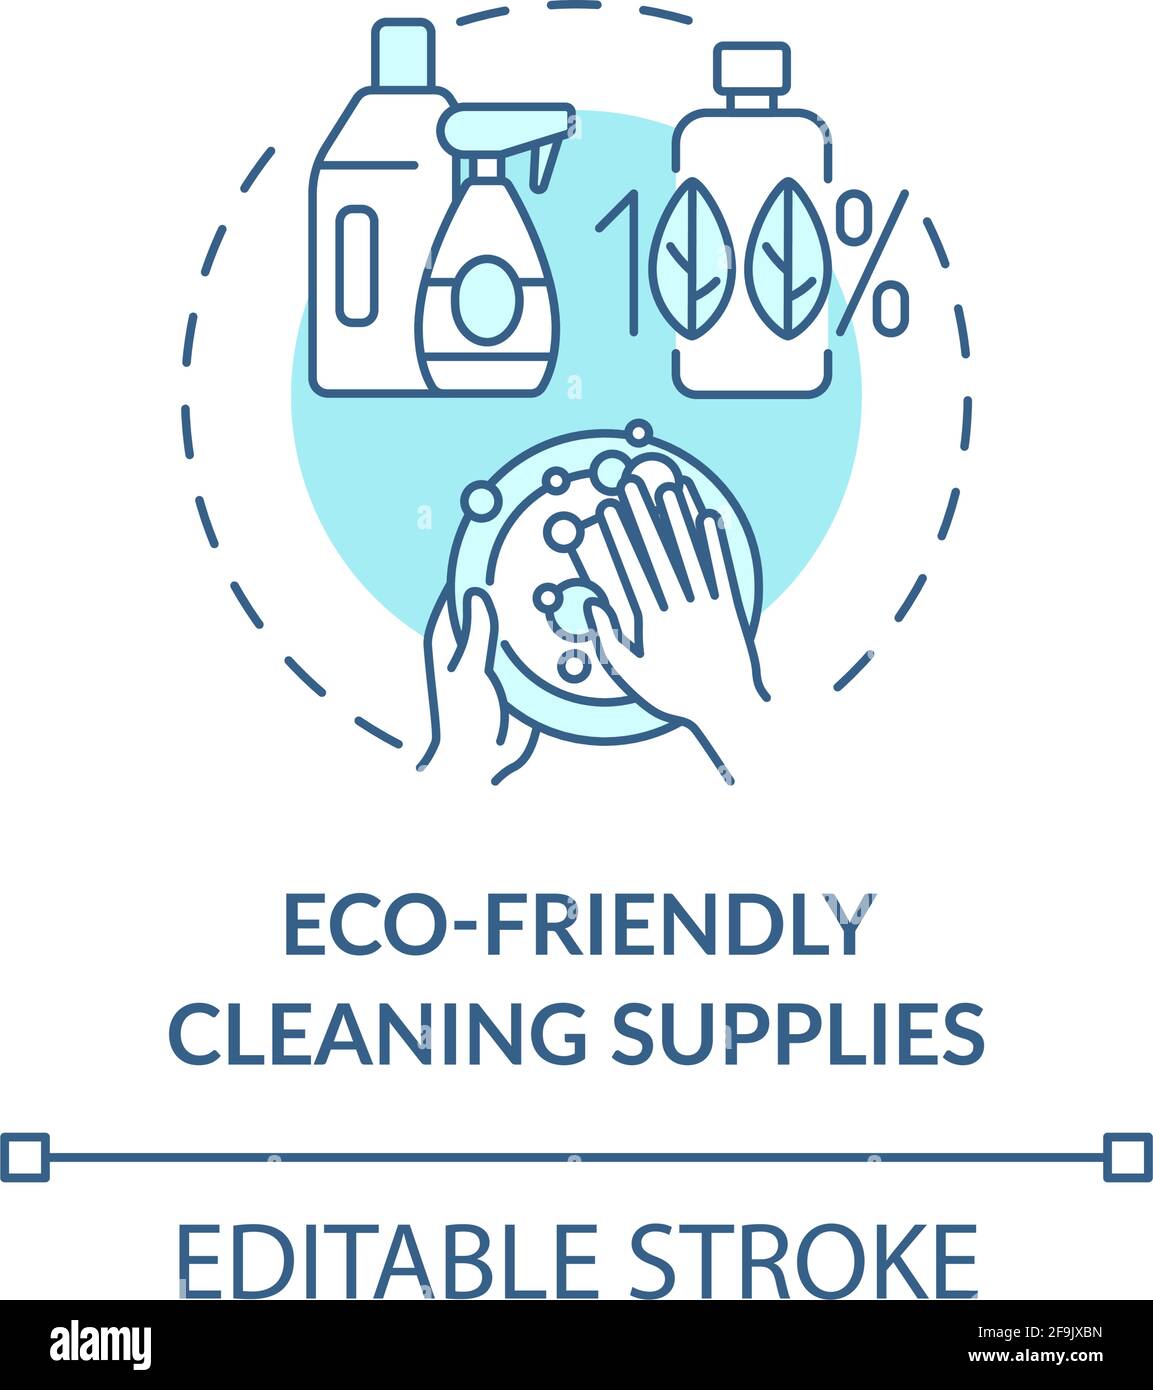 Eco friendly cleaning supplies concept icon Stock Vector